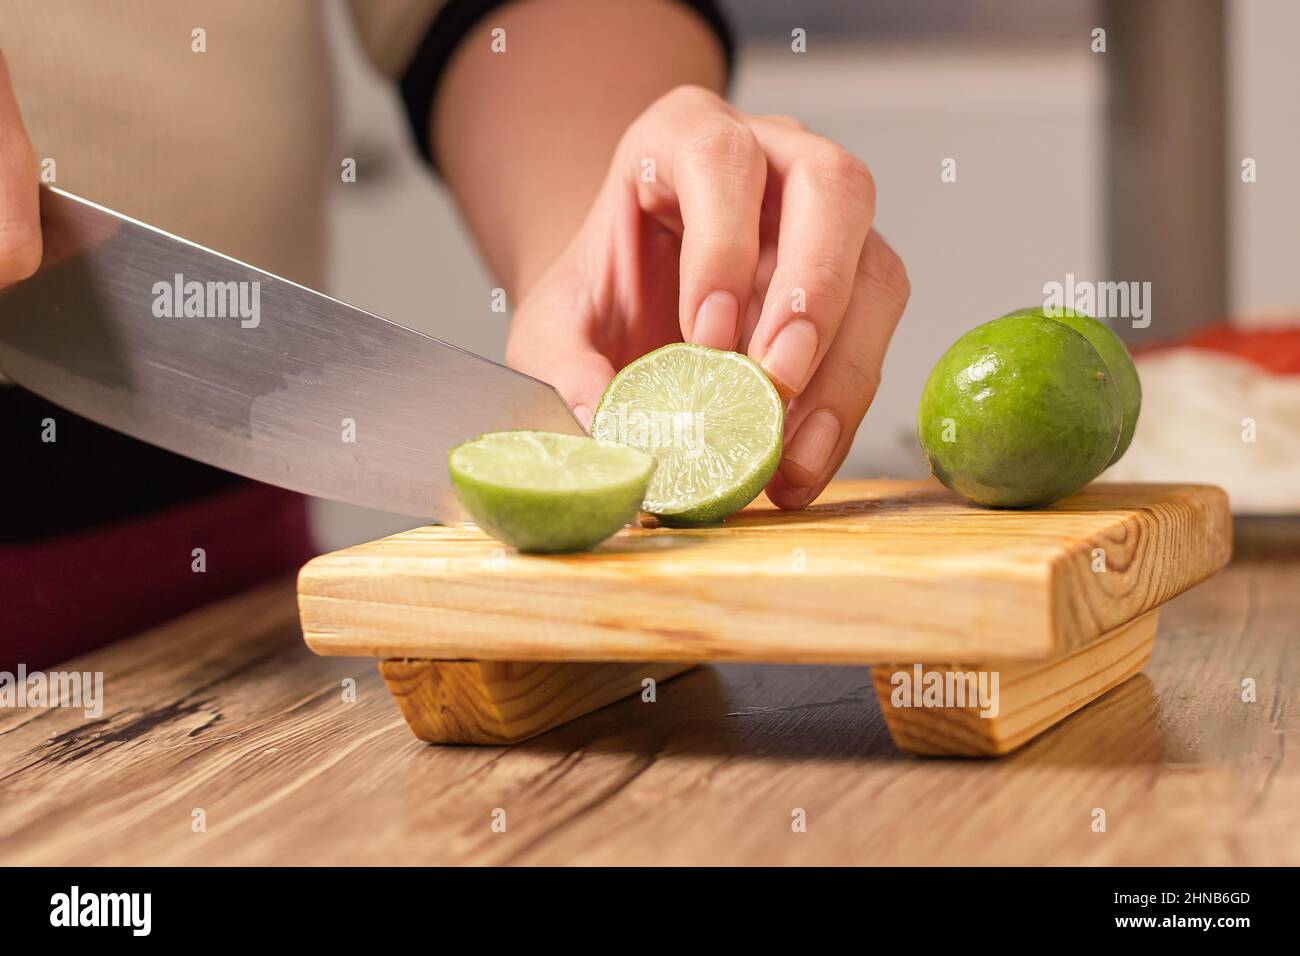 person cutting a green lemon with a knife on wooden table in his kitchen Stock Photo